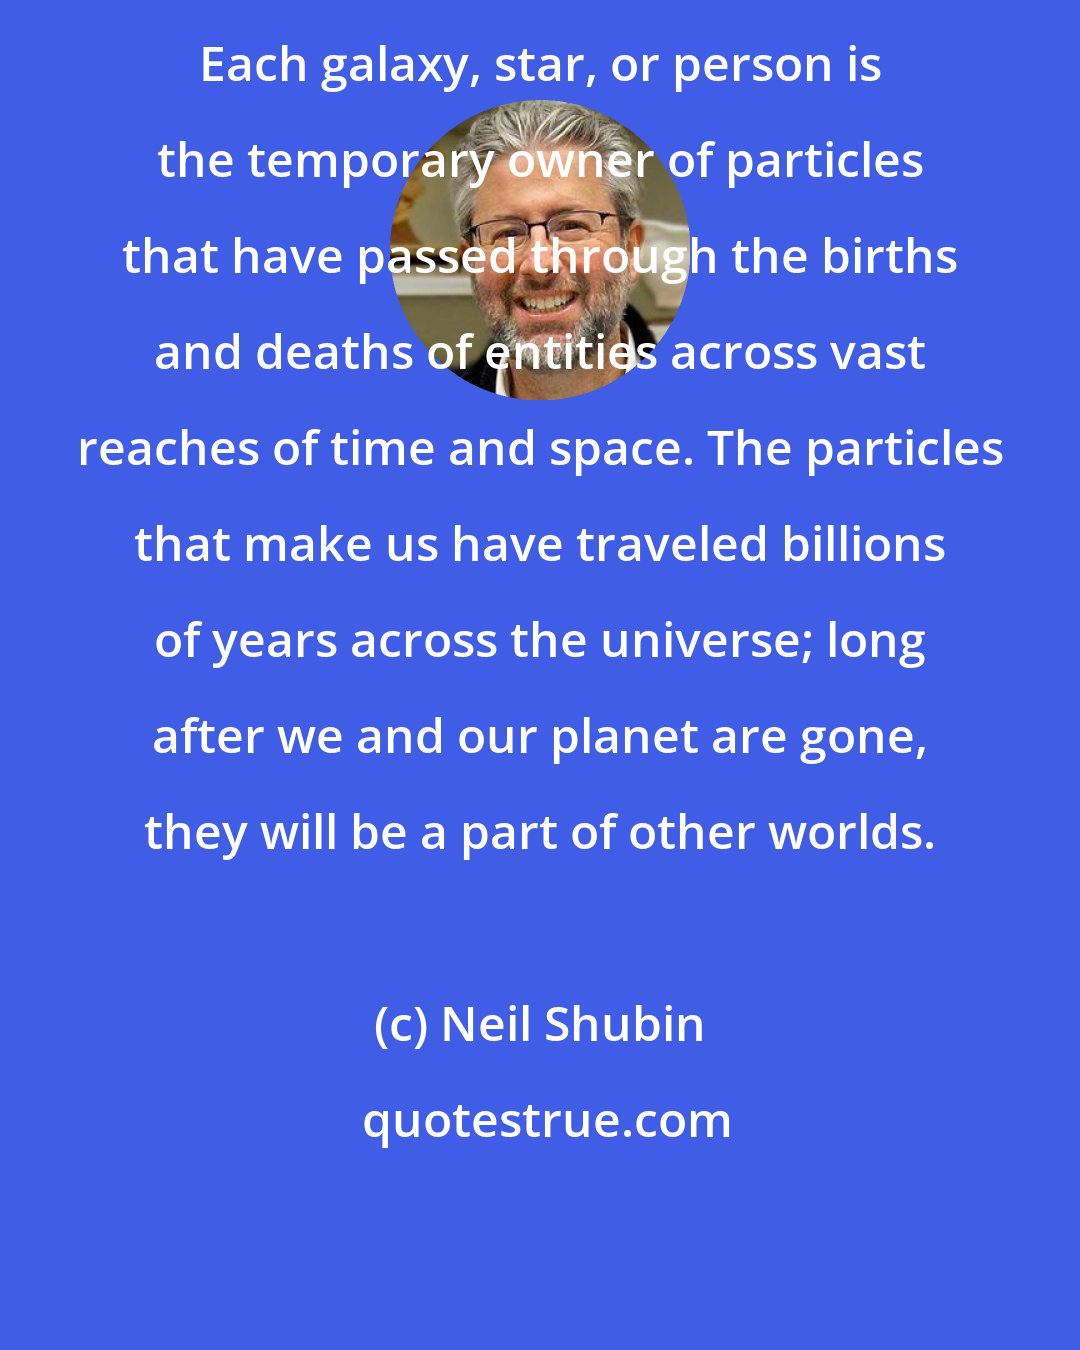 Neil Shubin: Each galaxy, star, or person is the temporary owner of particles that have passed through the births and deaths of entities across vast reaches of time and space. The particles that make us have traveled billions of years across the universe; long after we and our planet are gone, they will be a part of other worlds.